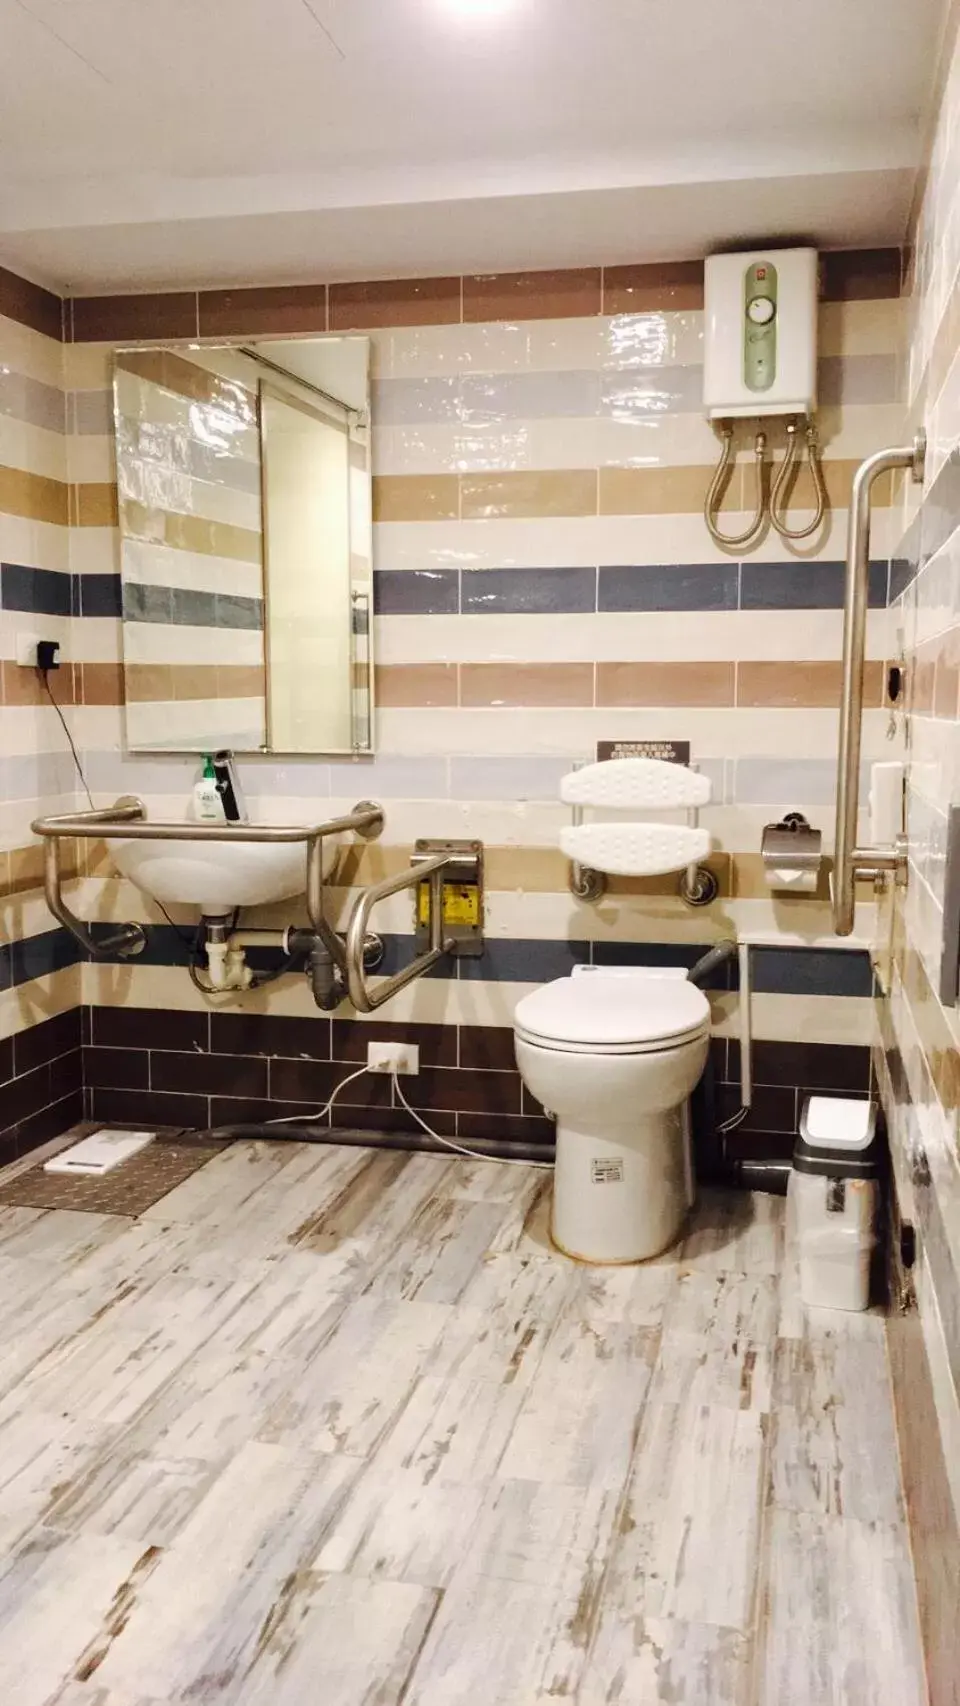 Facility for disabled guests, Bathroom in Bon Hotel Taipei